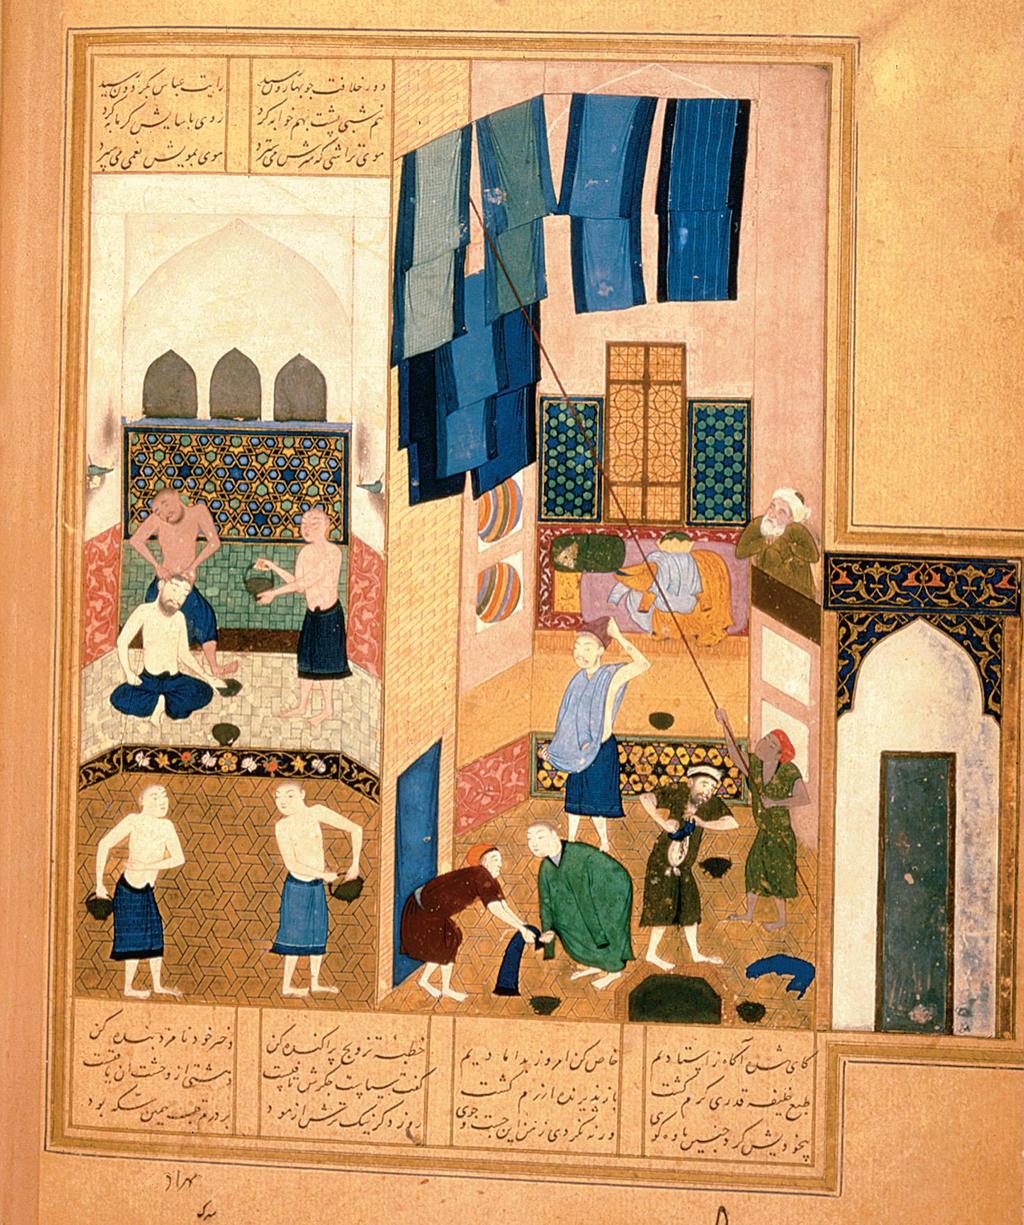 Figure 7.7 The rulers and nobility of the Abbasid capital in Baghdad frequented baths like that shown in this Persian miniature painting.